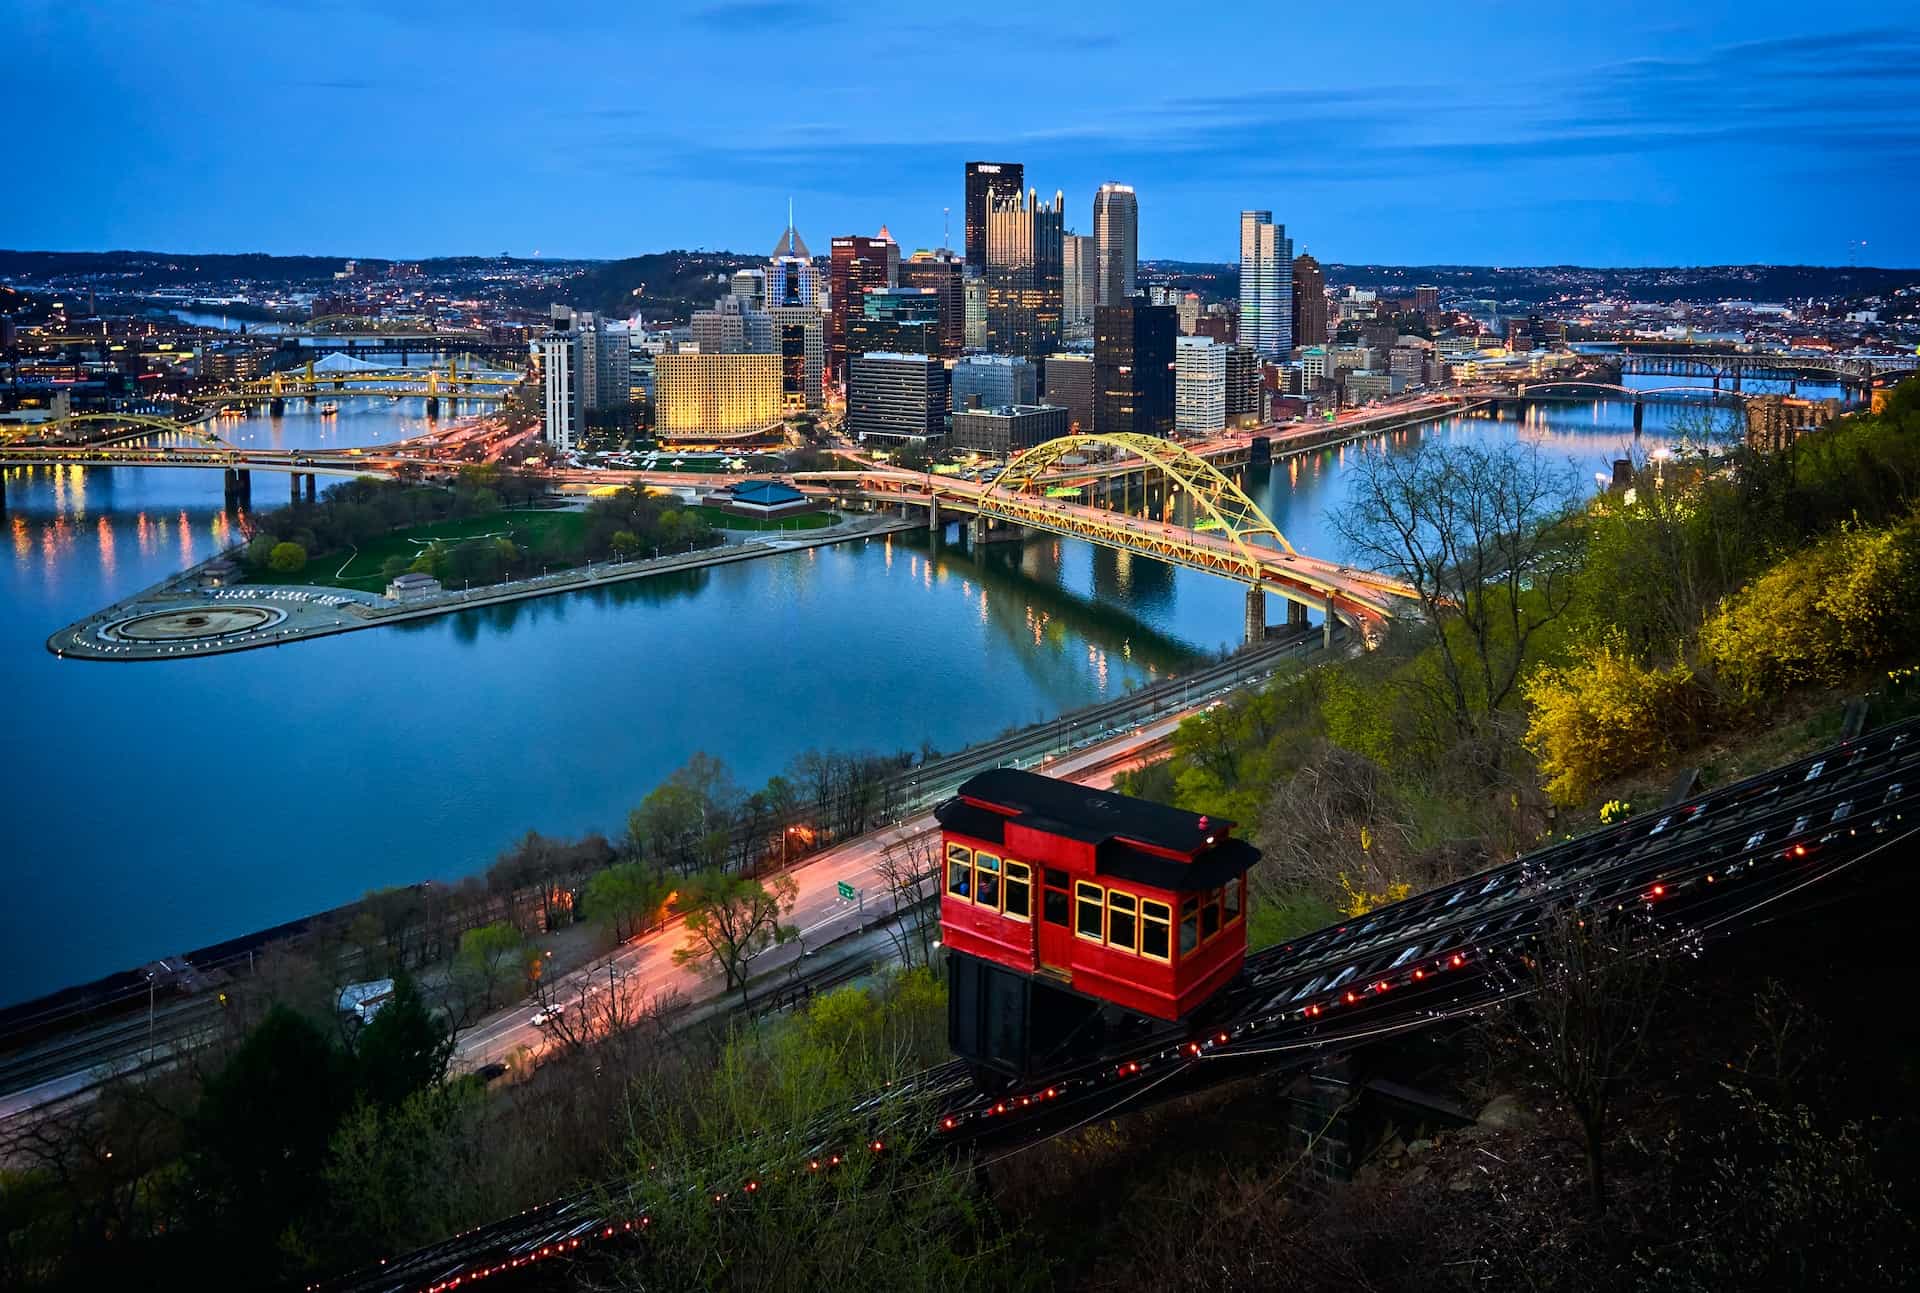 The city of Pittsburgh, Pennsylvania, with the dense downtown district seen surrounded by a large river and several bridges cutting across it.